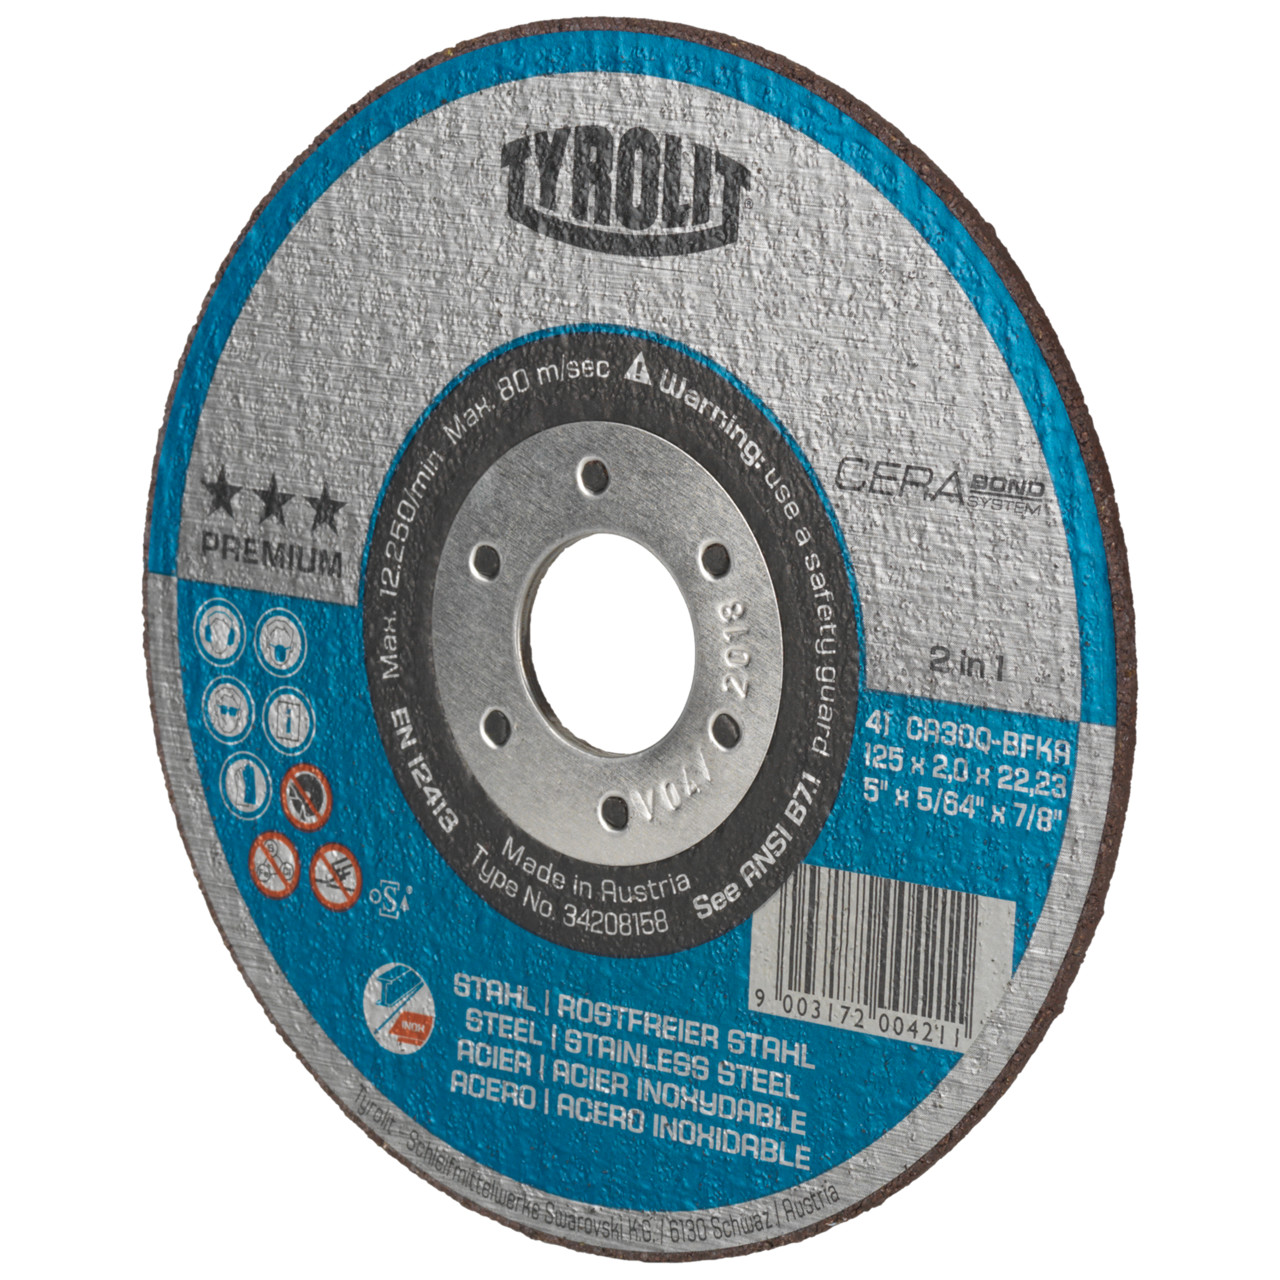 TYROLIT CERABOND Cutting disc DxDxH 150x1.6x22.23 2in1 for steel and stainless steel, shape: 41 - straight version, Art. 34256268